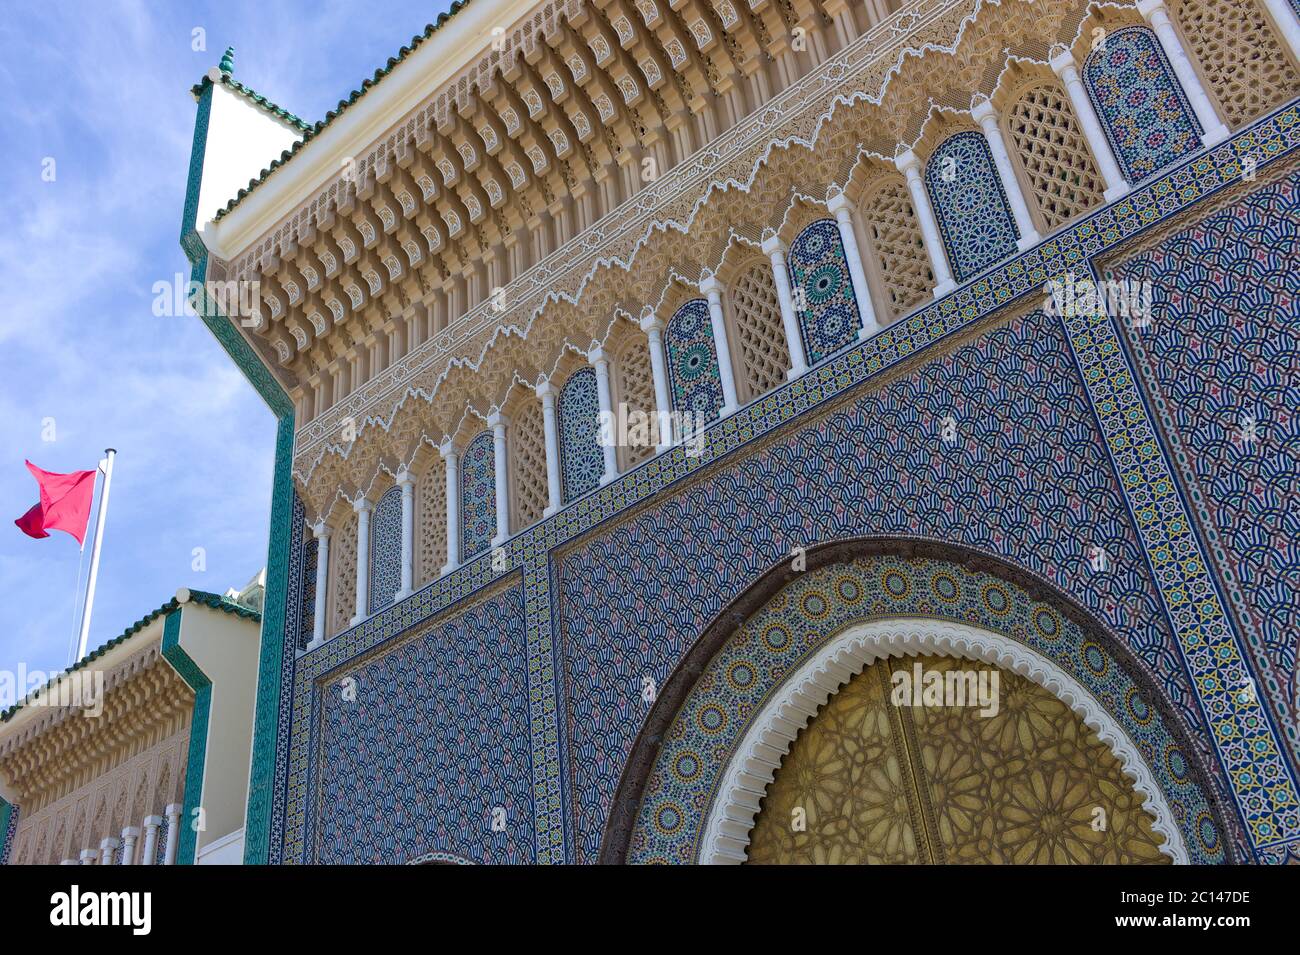 Facade of the Dar el-Makhzen palace with golden doors in Fes, Morocco Stock Photo